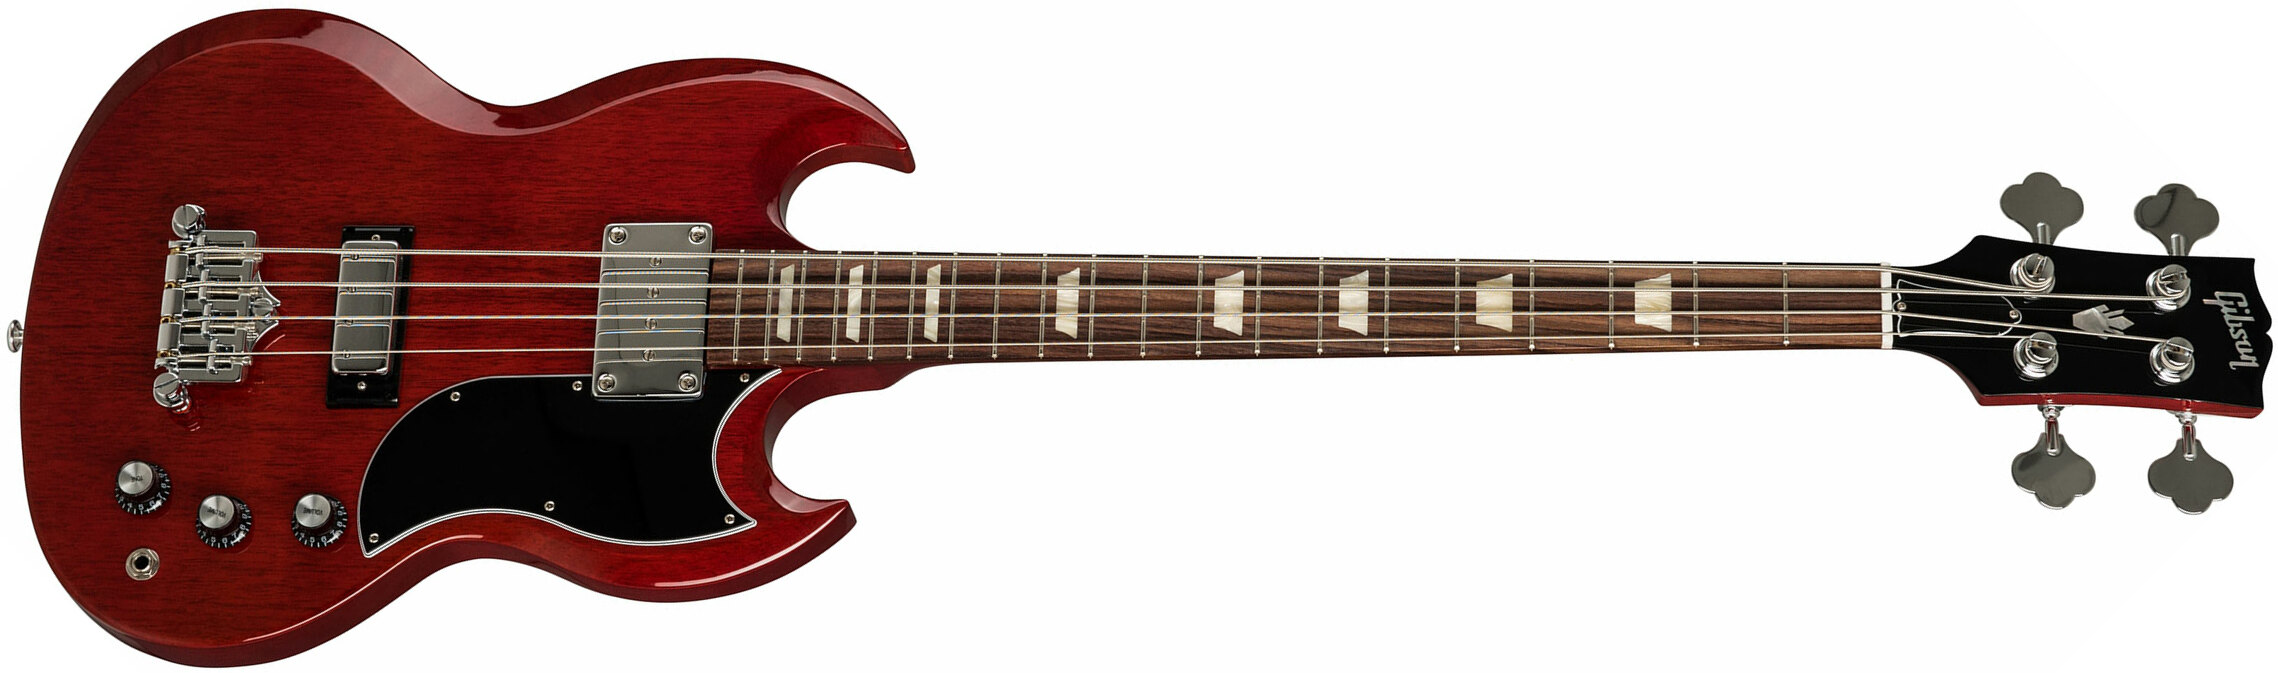 Gibson Sg Standard Bass - Heritage Cherry - Basse Électrique Solid Body - Main picture